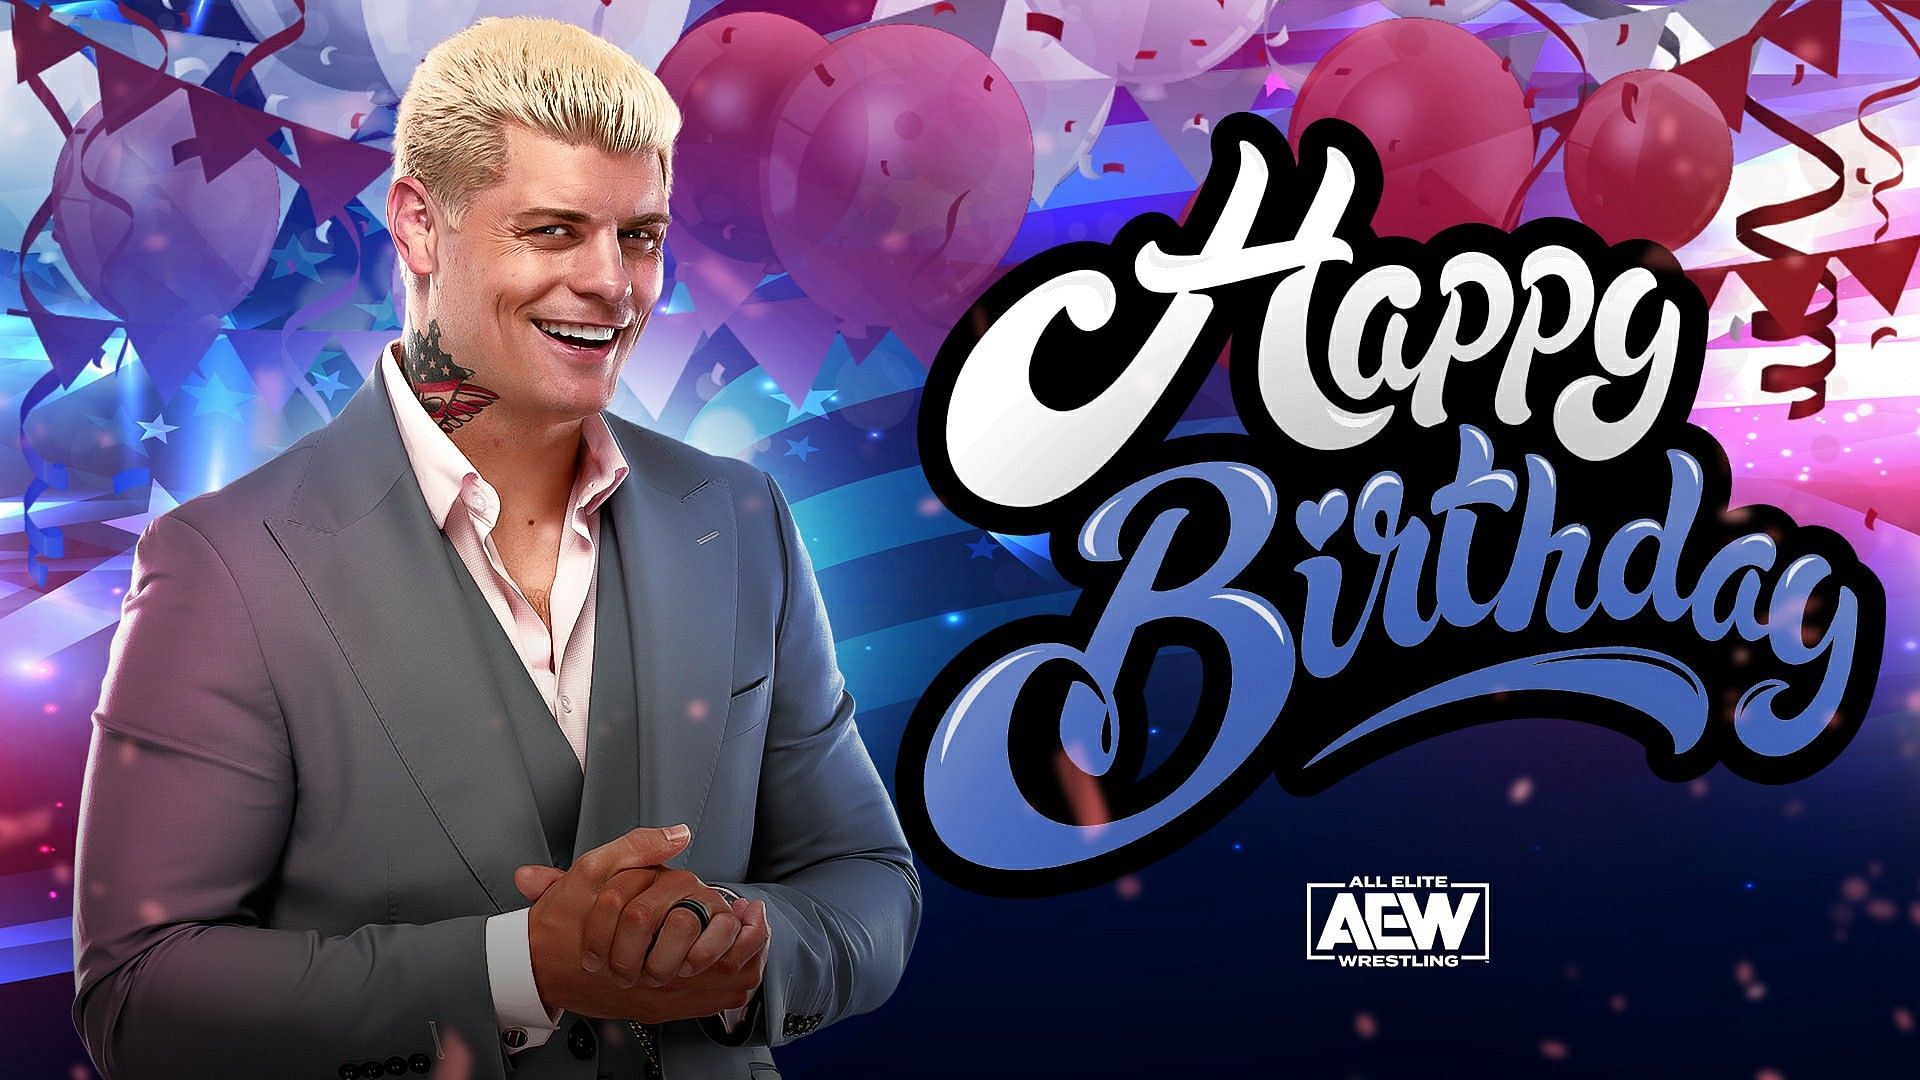 The American Nightmare is celebrating his birthday today